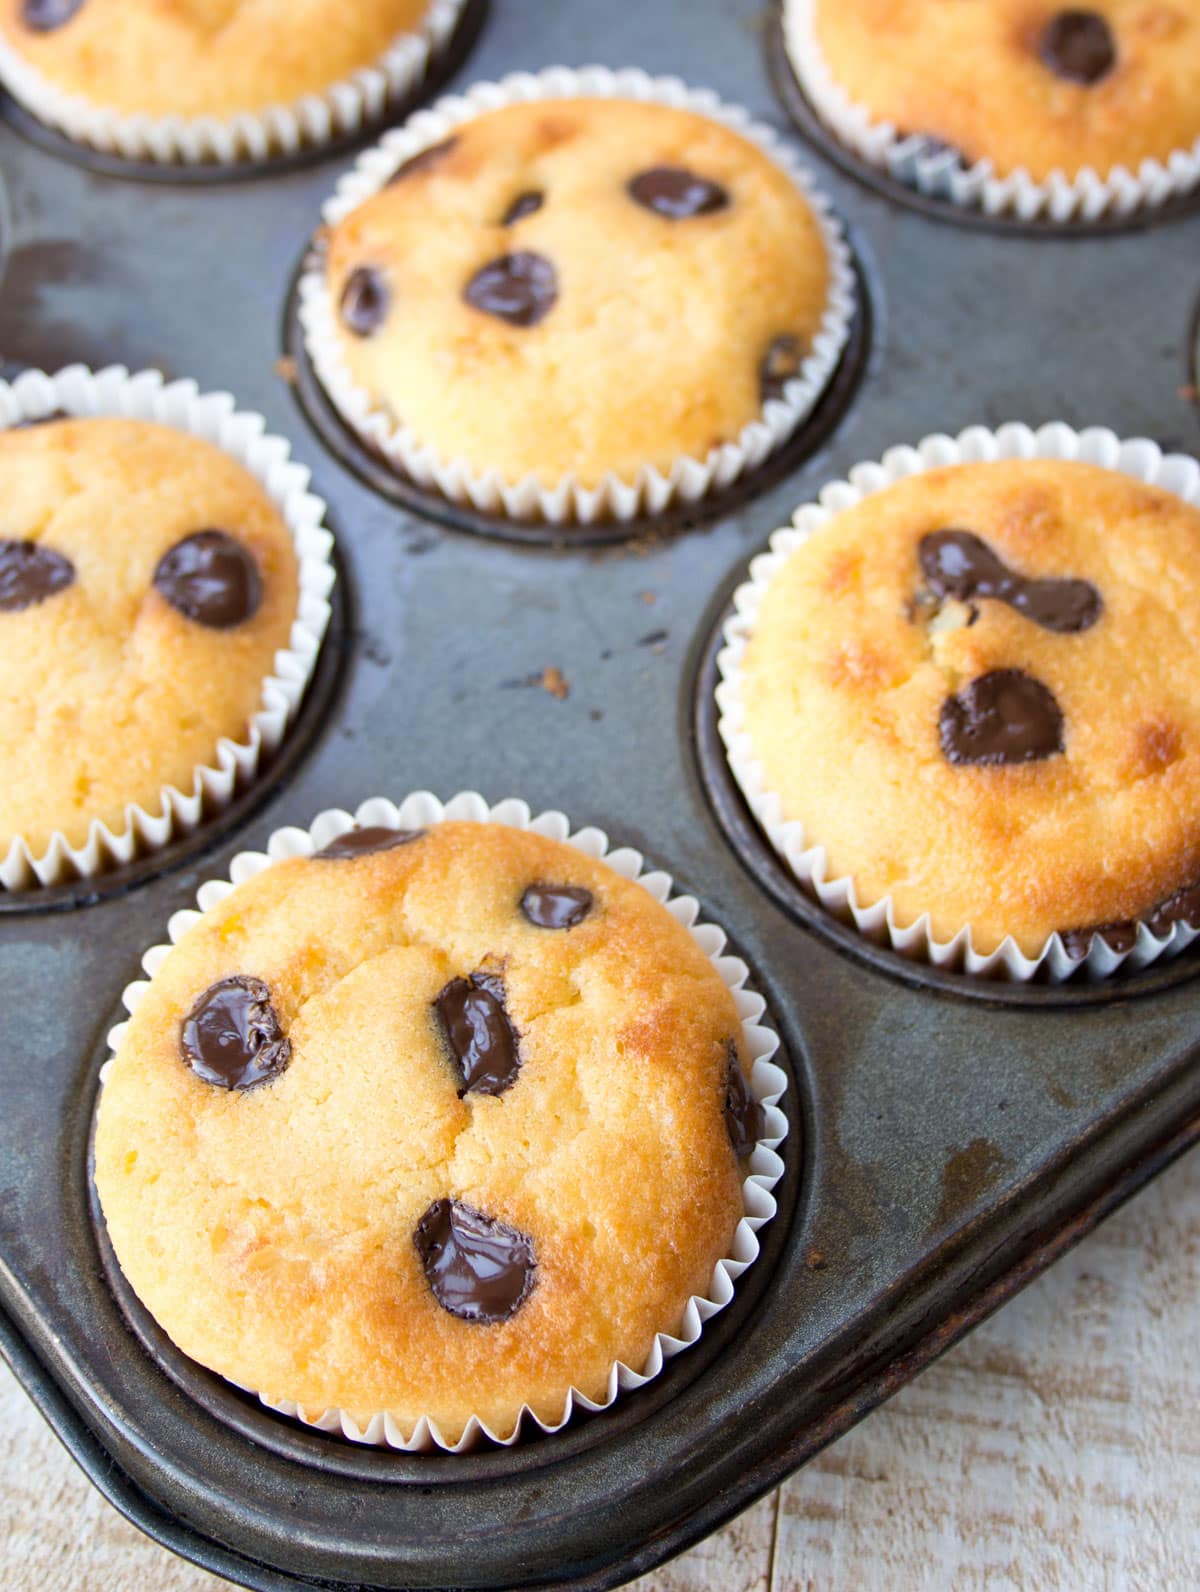 Baked almond flour muffins in a muffin pan.